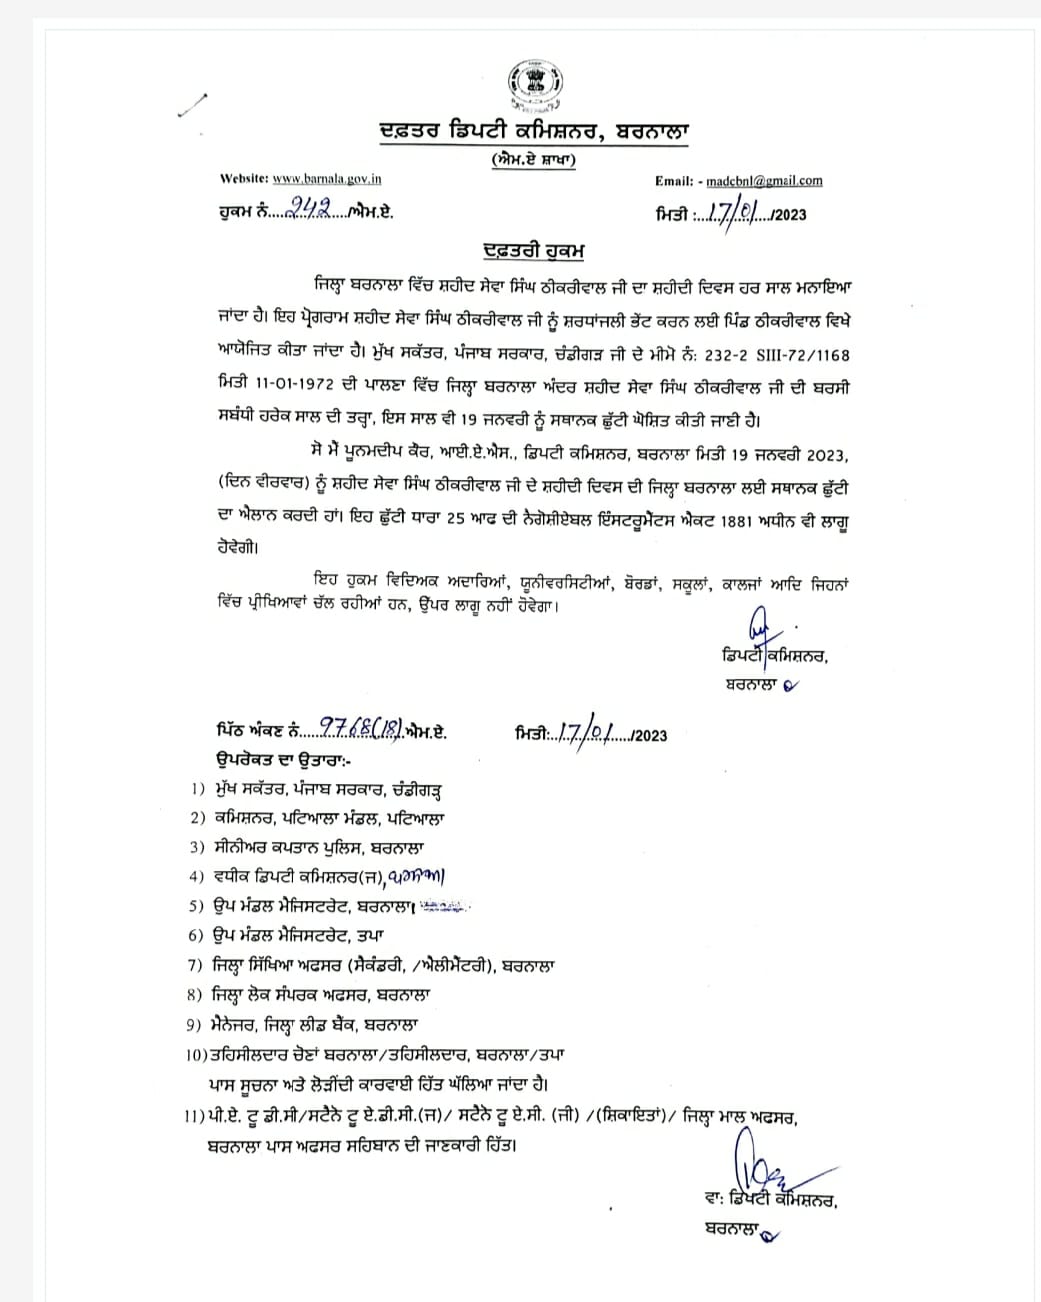 Holiday Declared in one district of Punjab tomorrow 19 January